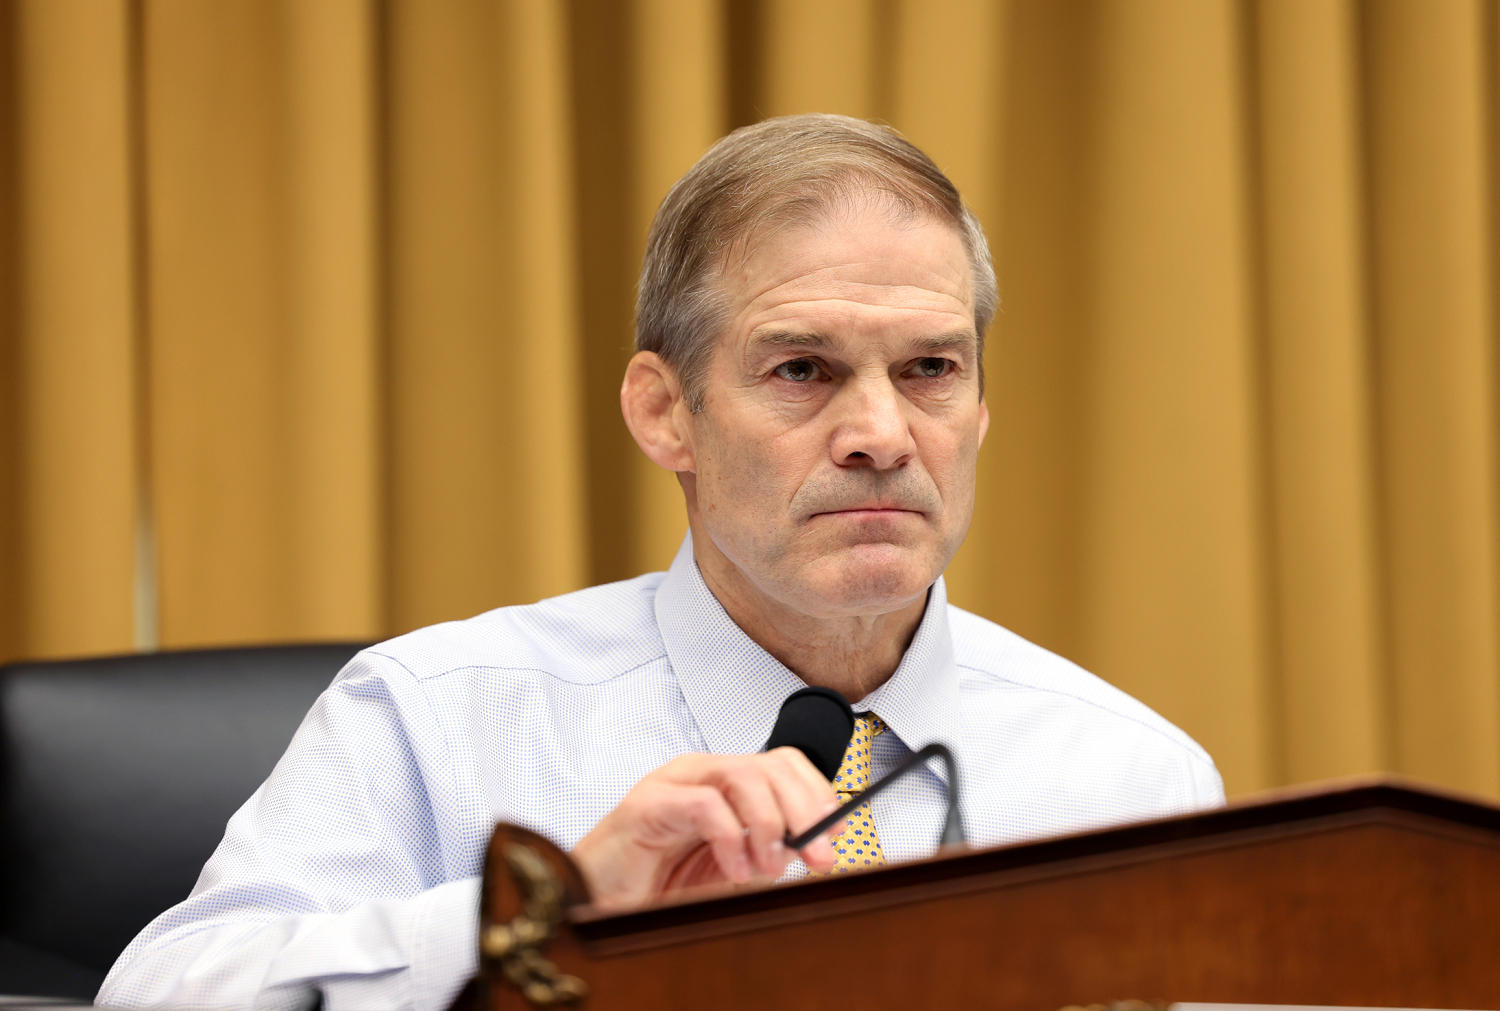 Jim Jordan’s latest hearing was a frightening look at American authoritarianism